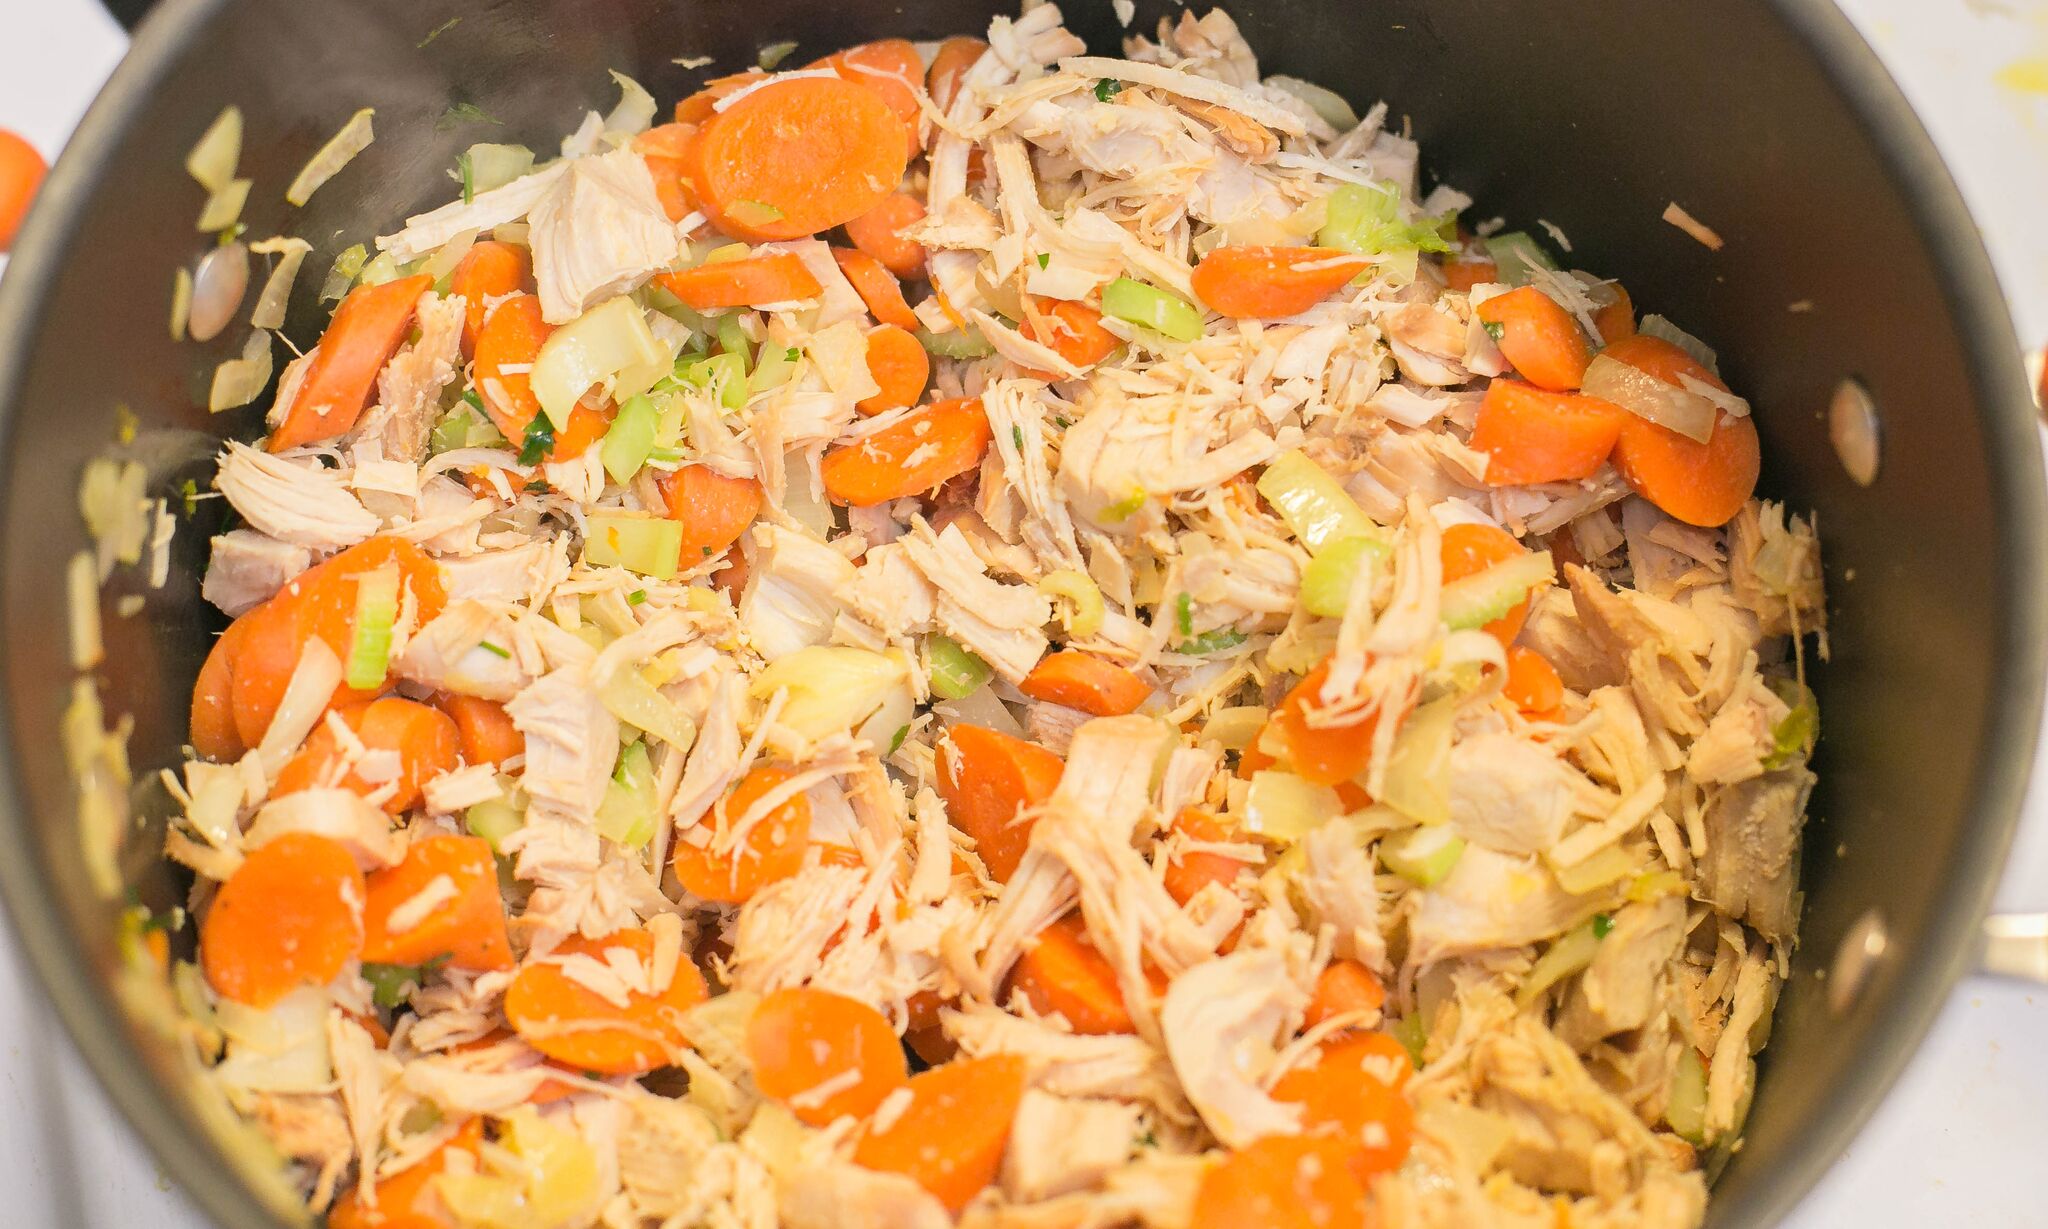 Turkey & Rice Soup | Add shredded turkey into the pot with the vegetables and stir. Season with salt and pepper. 